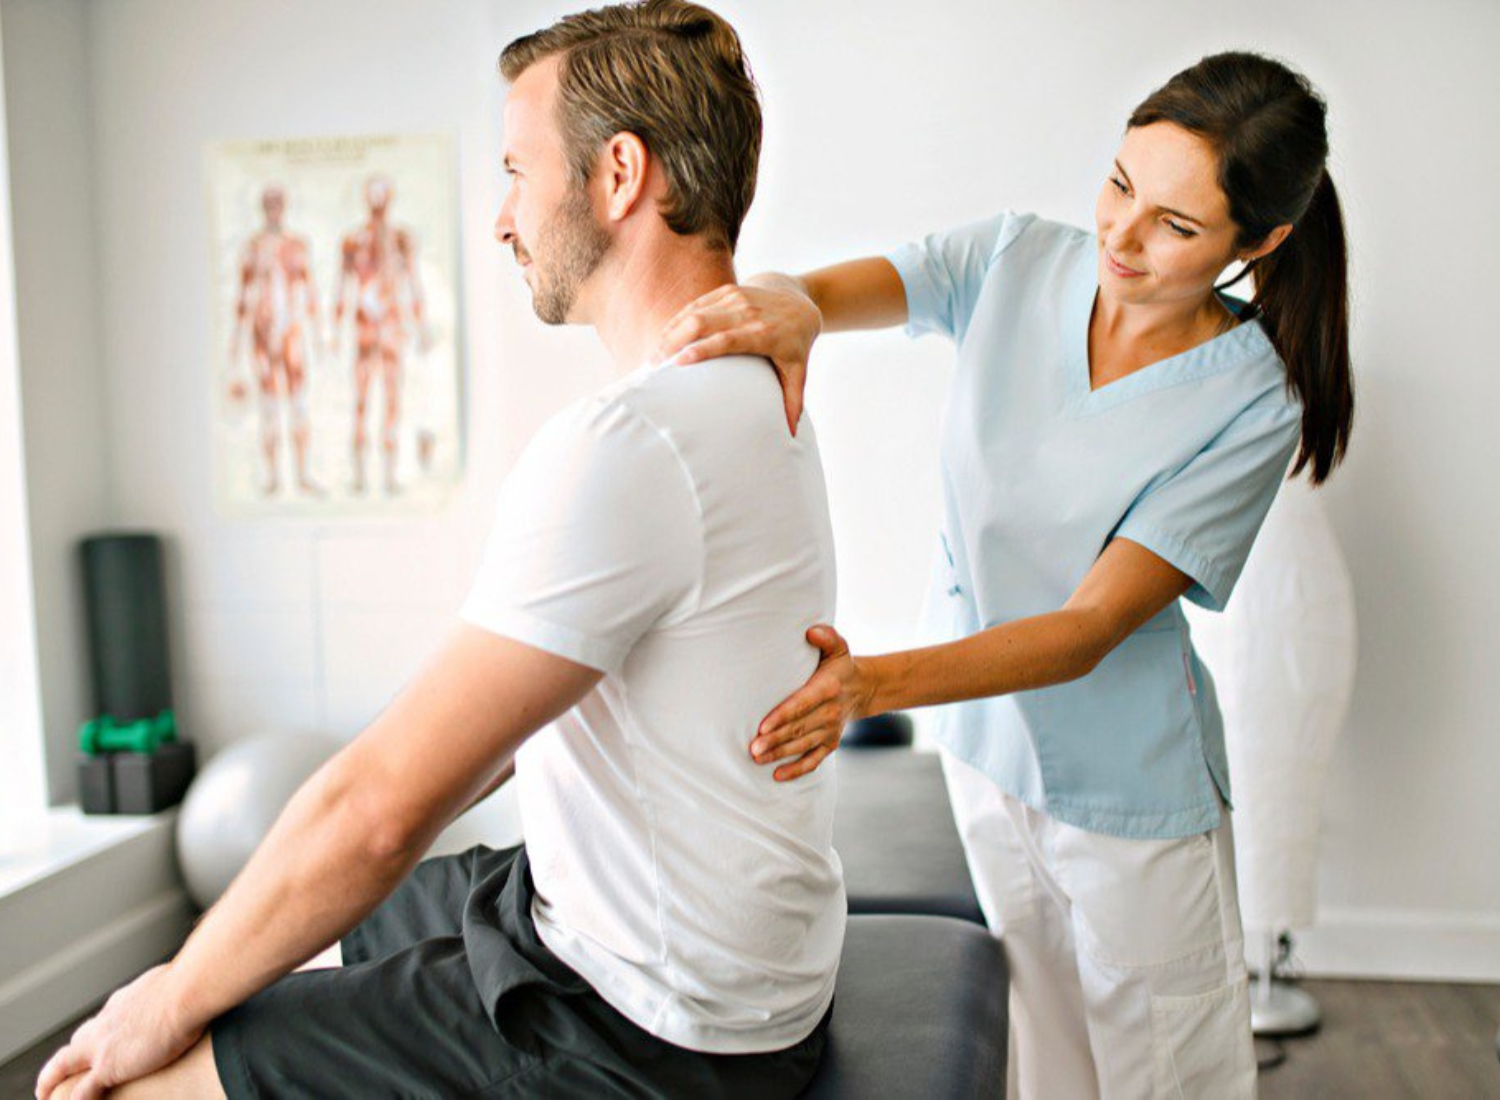 Good Reasons to ease Back Pain and visit a Chiropractor